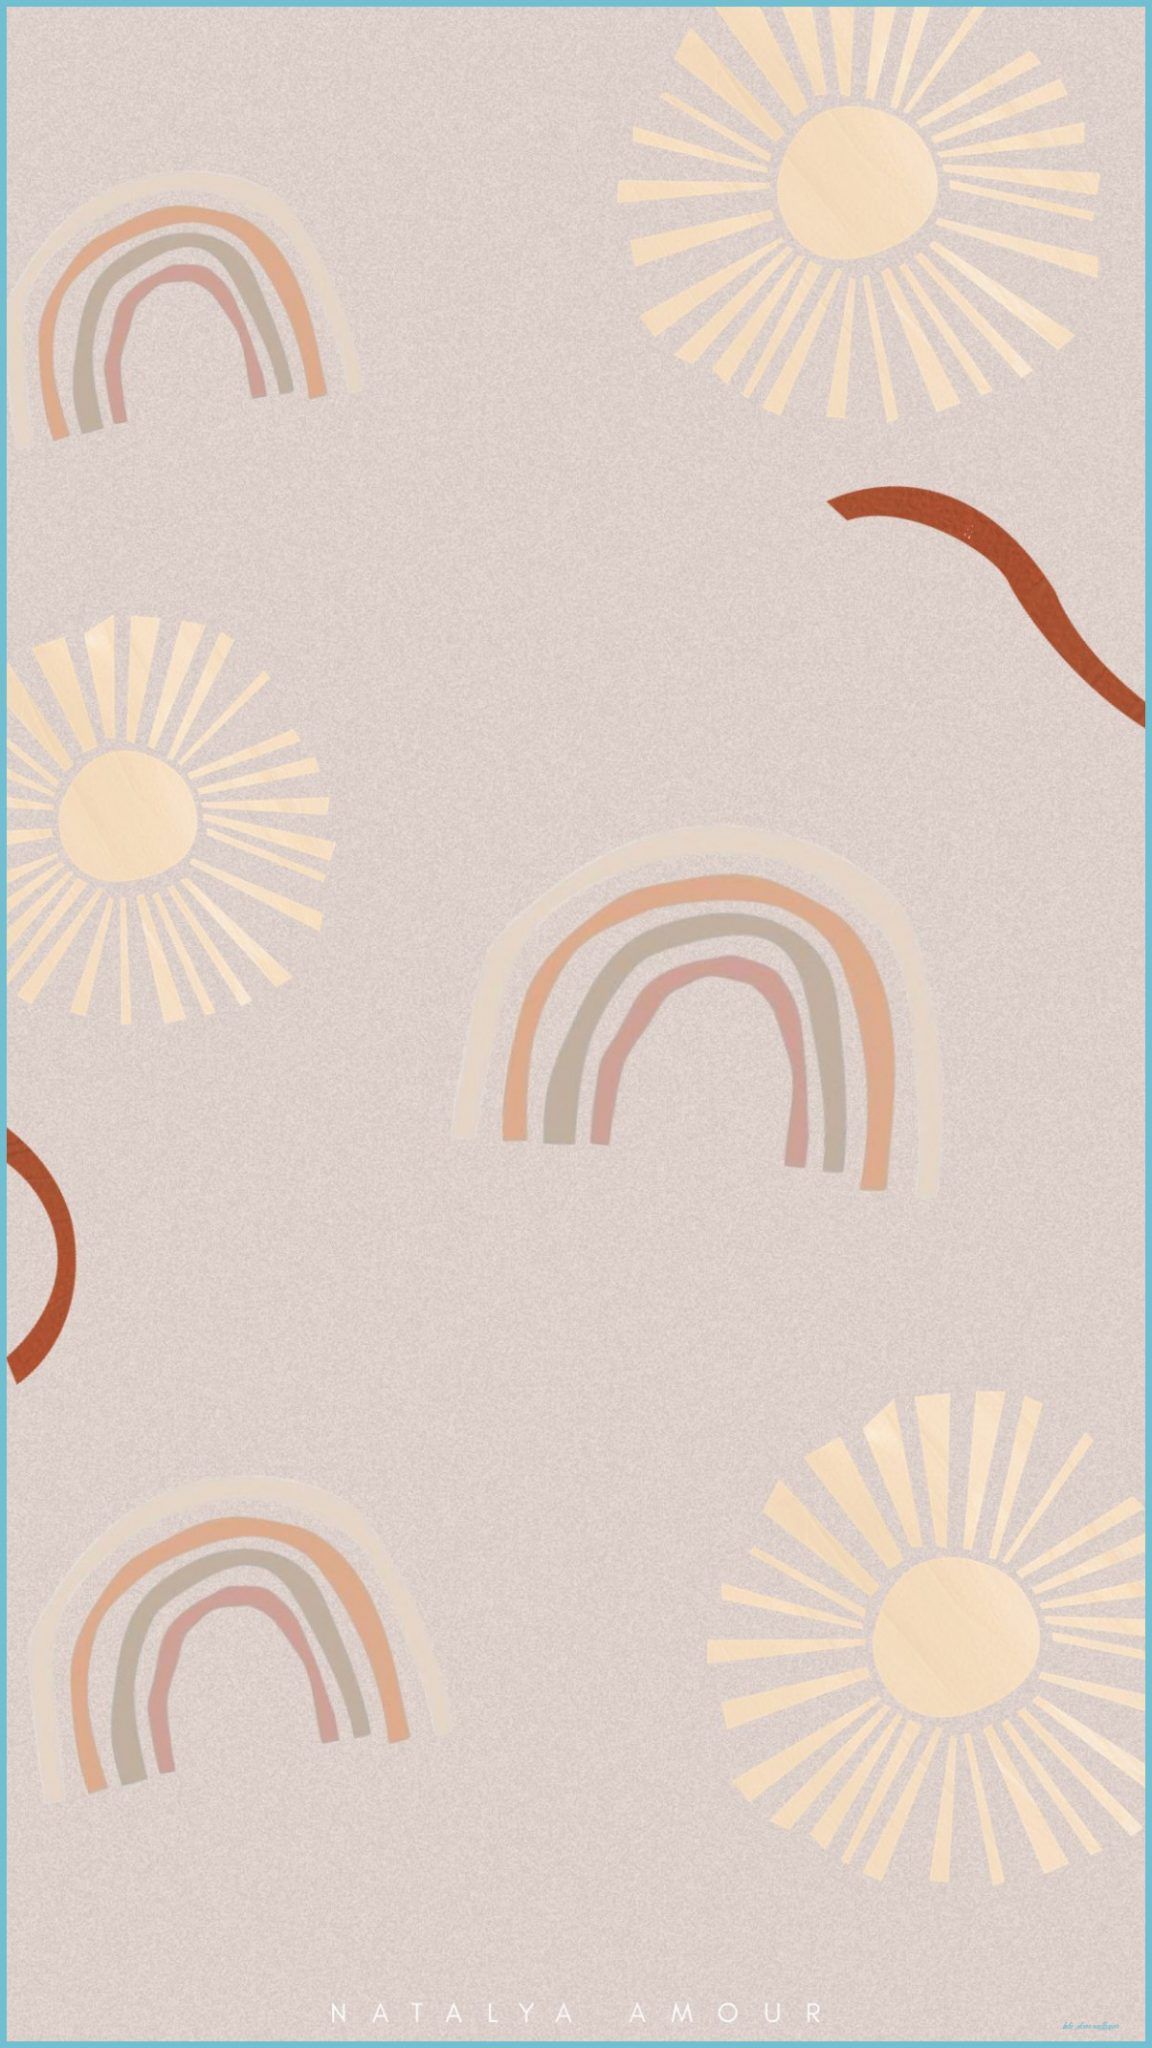 A poster with rainbows and suns - Boho, sun